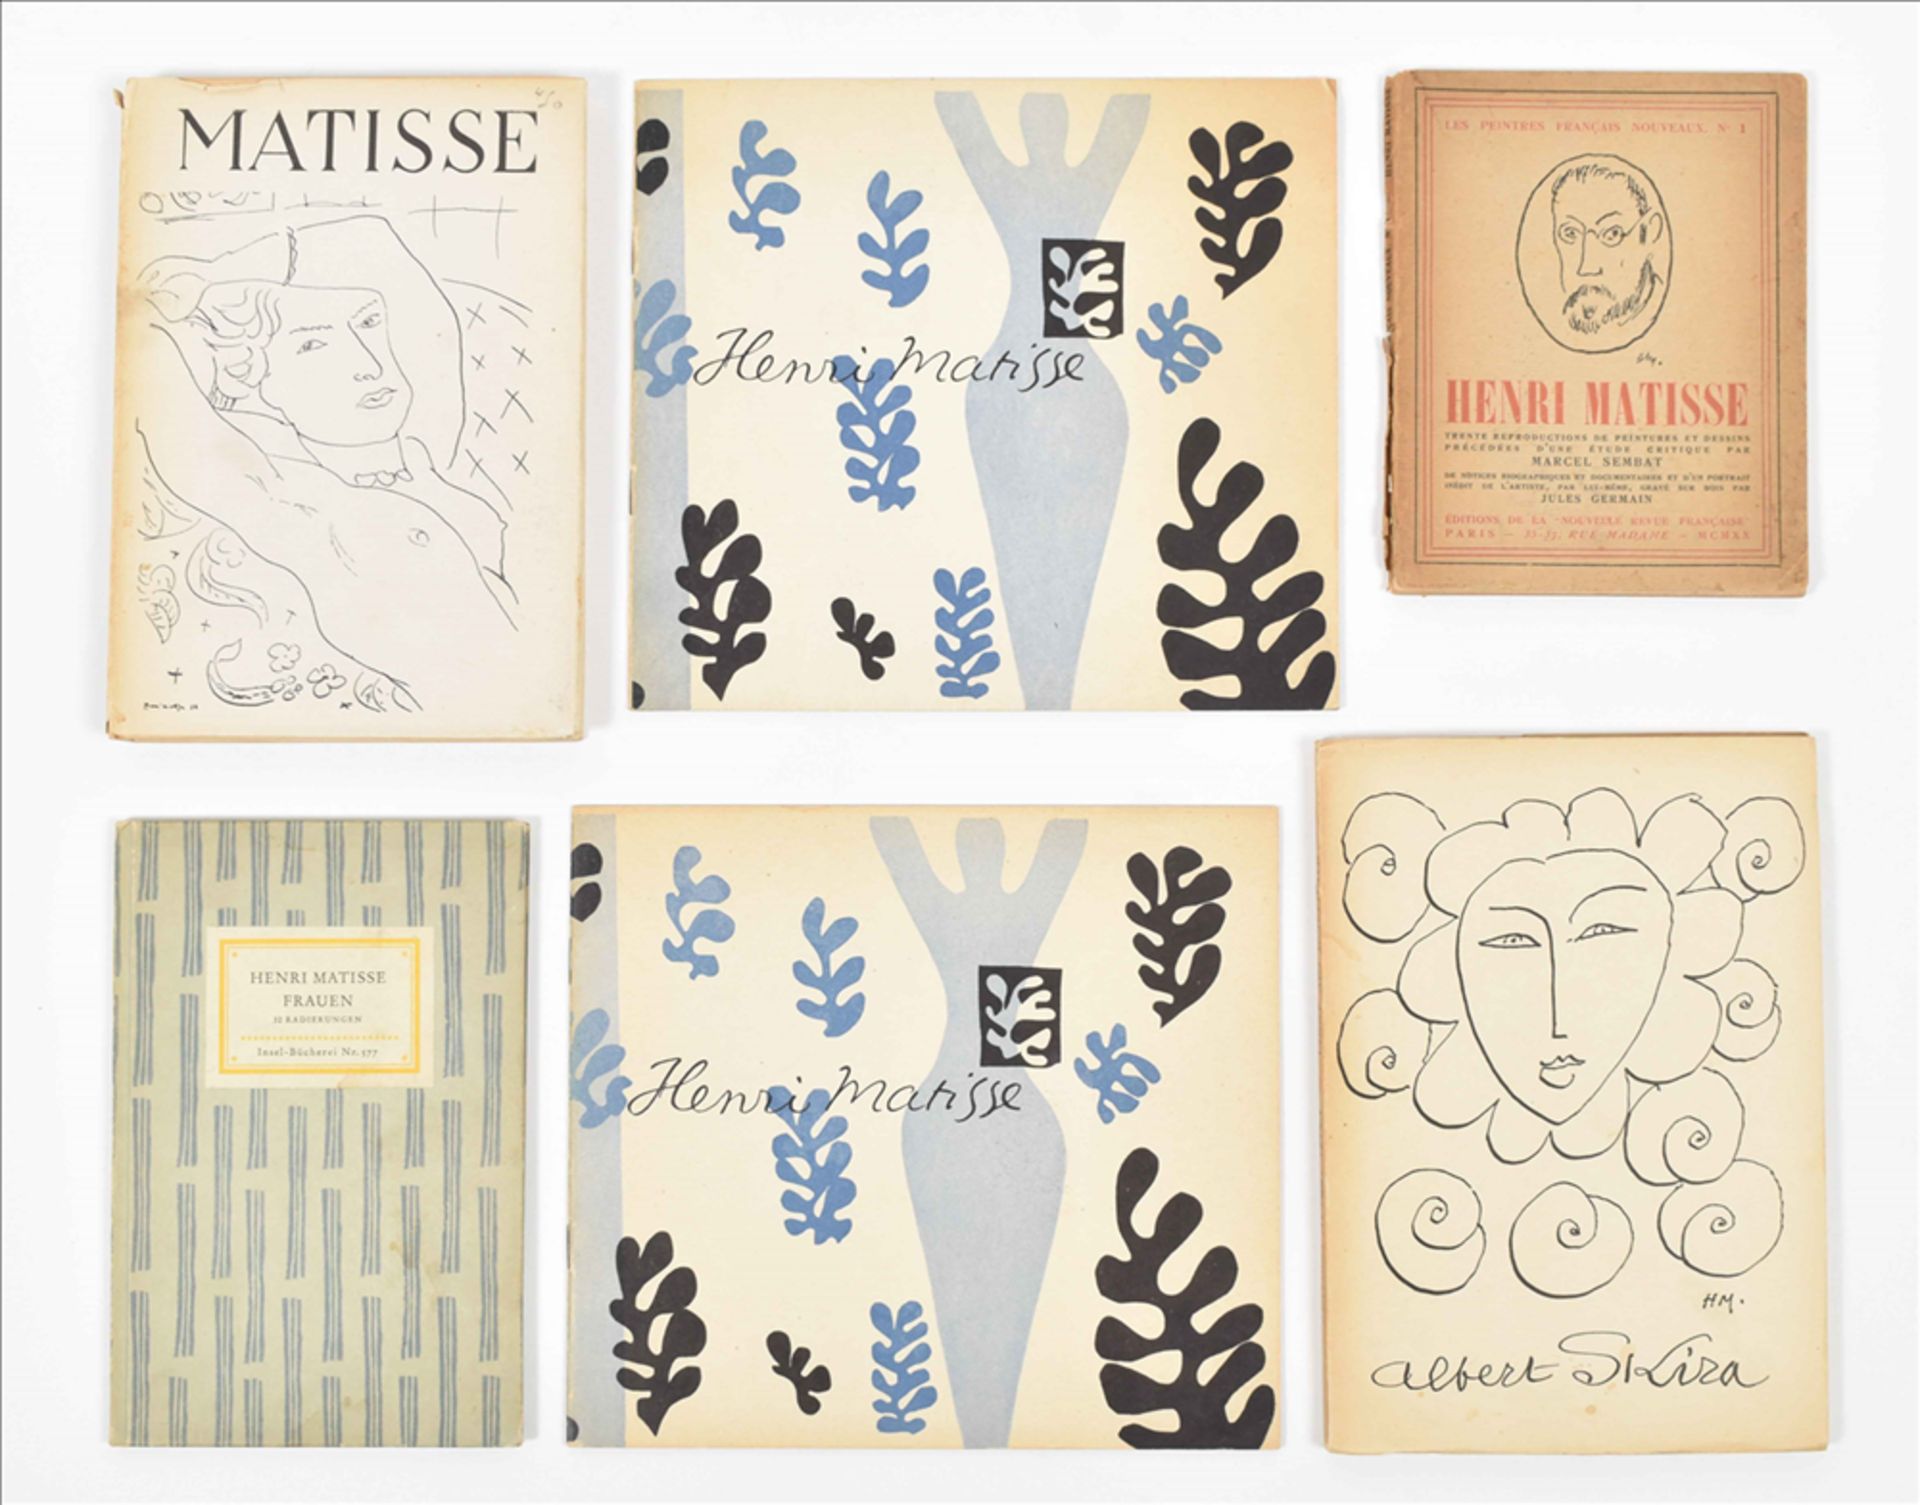 [Fauvism] Collection of catalogues and works on Henri Matisse (1869-1954)